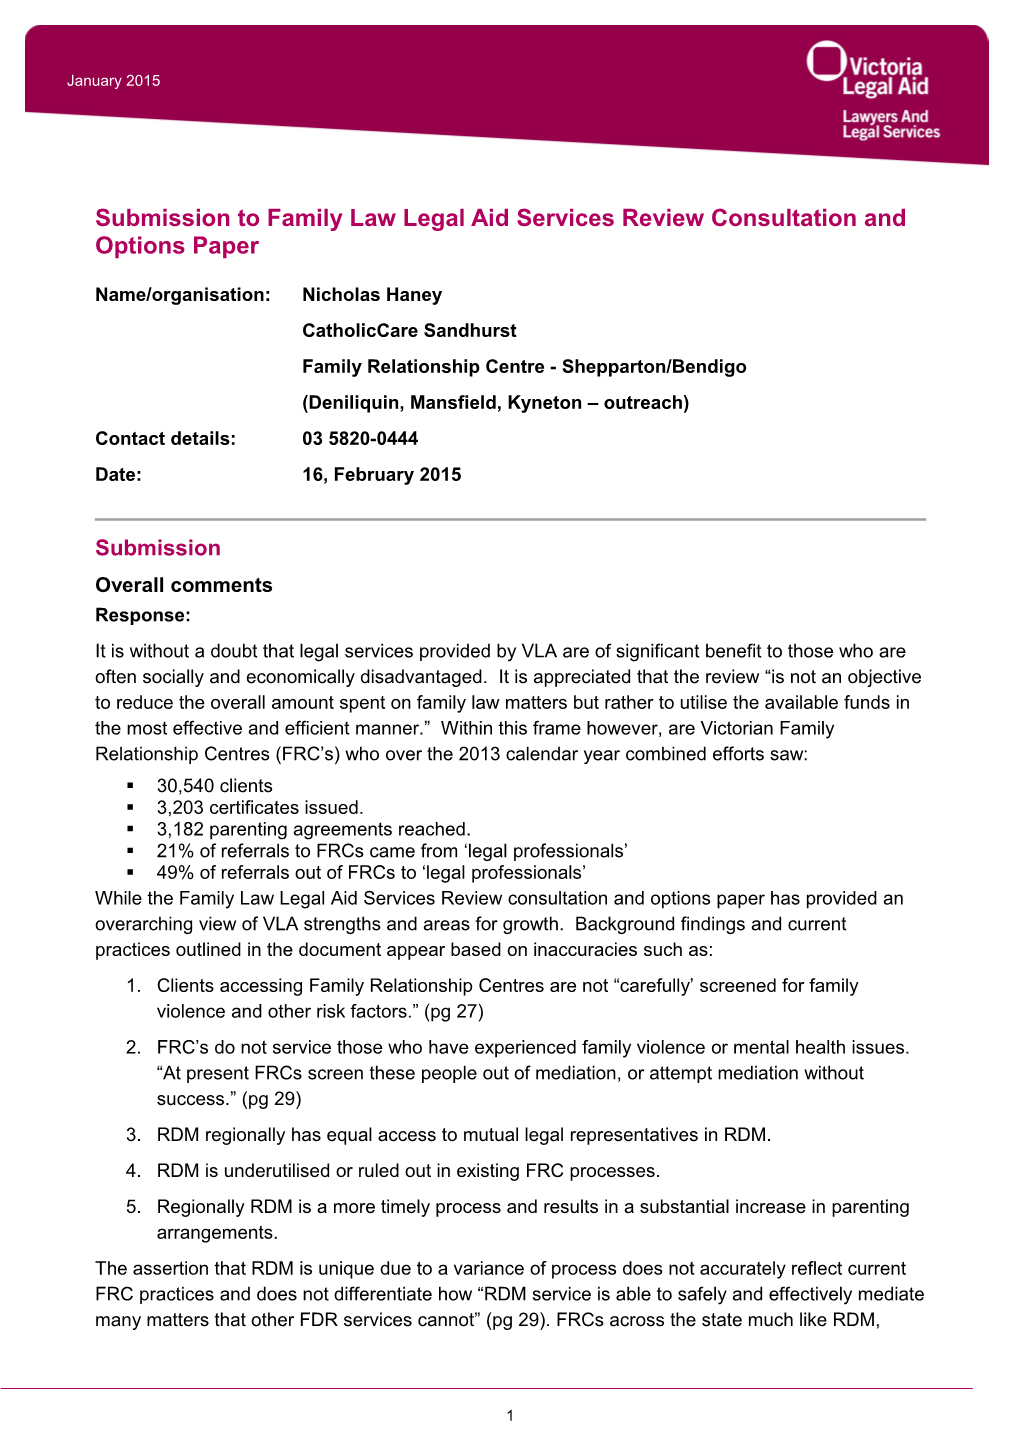 Submission Form for Family Law Legal Aid Services Review Consultation and Options Paper